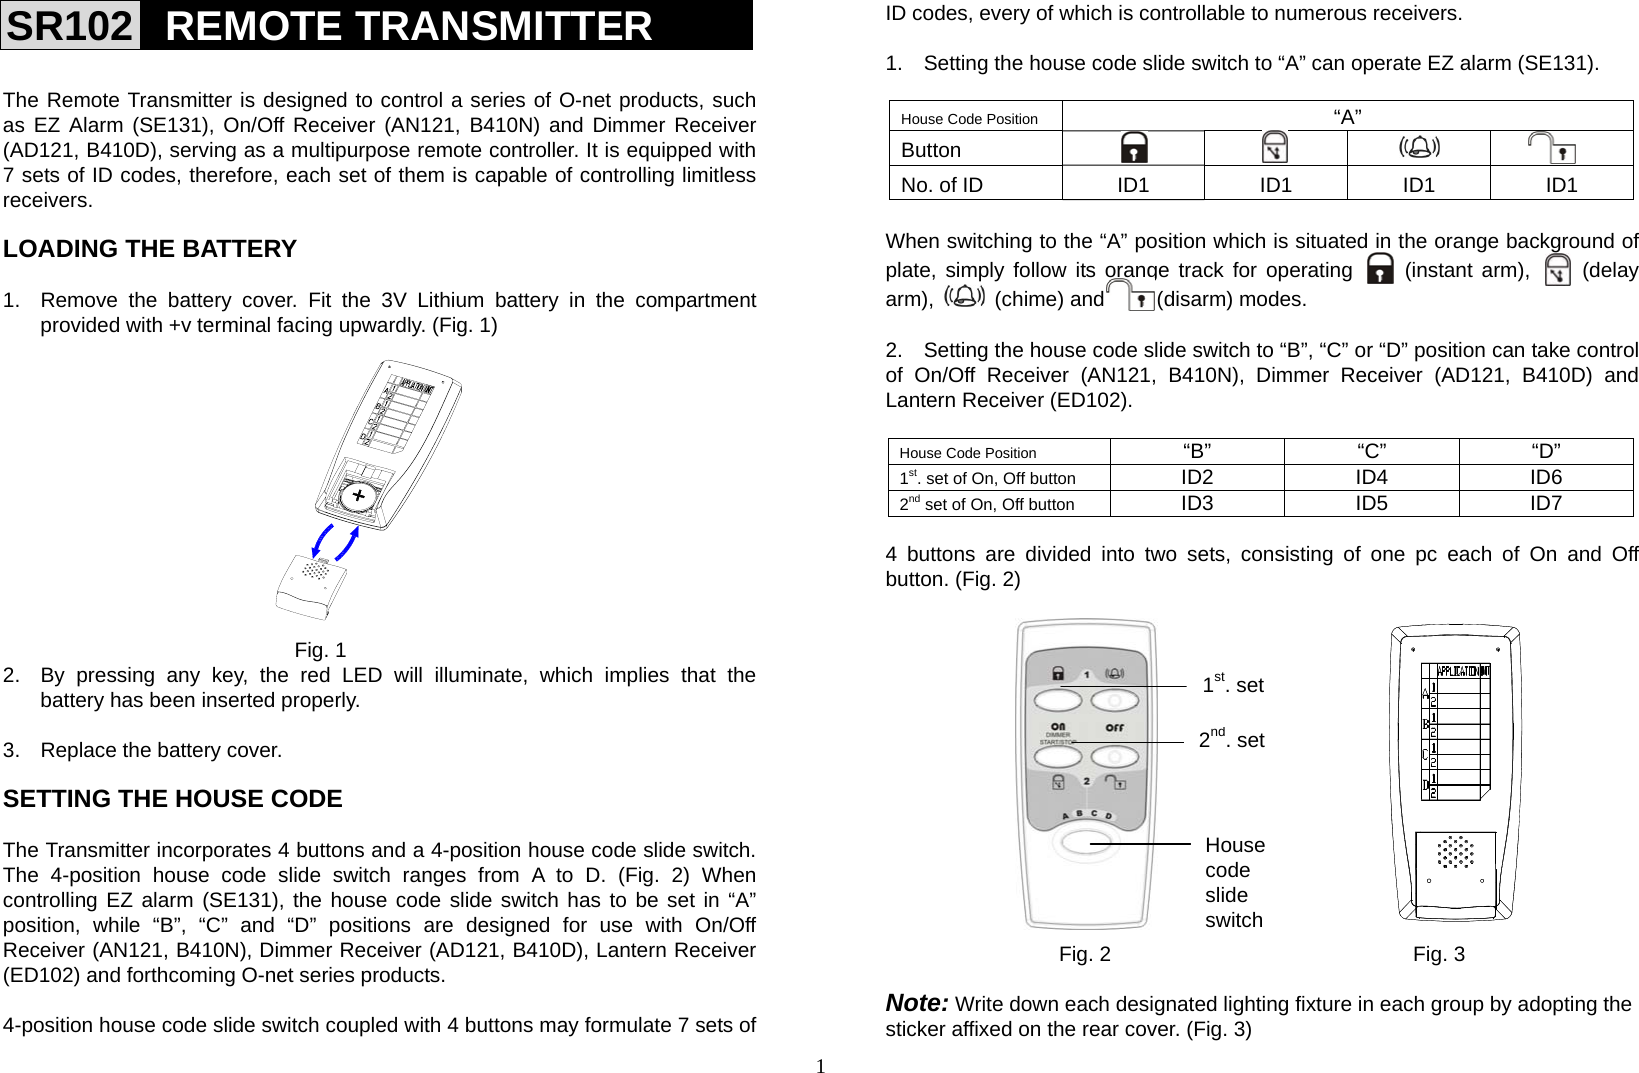 1 SR102  REMOTE TRANSMITTER   The Remote Transmitter is designed to control a series of O-net products, such as EZ Alarm (SE131), On/Off Receiver (AN121, B410N) and Dimmer Receiver (AD121, B410D), serving as a multipurpose remote controller. It is equipped with 7 sets of ID codes, therefore, each set of them is capable of controlling limitless receivers.  LOADING THE BATTERY    1.  Remove the battery cover. Fit the 3V Lithium battery in the compartment provided with +v terminal facing upwardly. (Fig. 1)                                           Fig. 1 2.  By pressing any key, the red LED will illuminate, which implies that the battery has been inserted properly.  3.  Replace the battery cover.  SETTING THE HOUSE CODE  The Transmitter incorporates 4 buttons and a 4-position house code slide switch.     The 4-position house code slide switch ranges from A to D. (Fig. 2) When controlling EZ alarm (SE131), the house code slide switch has to be set in “A” position, while “B”, “C” and “D” positions are designed for use with On/Off Receiver (AN121, B410N), Dimmer Receiver (AD121, B410D), Lantern Receiver (ED102) and forthcoming O-net series products.  4-position house code slide switch coupled with 4 buttons may formulate 7 sets of ID codes, every of which is controllable to numerous receivers.  1.    Setting the house code slide switch to “A” can operate EZ alarm (SE131).  House Code Position  “A” Button     No. of ID  ID1  ID1  ID1  ID1  When switching to the “A” position which is situated in the orange background of plate, simply follow its orange track for operating     (instant arm),     (delay arm),   (chime) and     (disarm) modes.   2.    Setting the house code slide switch to “B”, “C” or “D” position can take control of On/Off Receiver (AN121, B410N), Dimmer Receiver (AD121, B410D) and Lantern Receiver (ED102).  House Code Position  “B” “C” “D” 1st. set of On, Off button  ID2 ID4 ID6 2nd set of On, Off button  ID3 ID5 ID7  4 buttons are divided into two sets, consisting of one pc each of On and Off button. (Fig. 2)                             Fig. 2                             Fig. 3  Note: Write down each designated lighting fixture in each group by adopting the sticker affixed on the rear cover. (Fig. 3) 1st. set2nd. setHouse code  slide switch